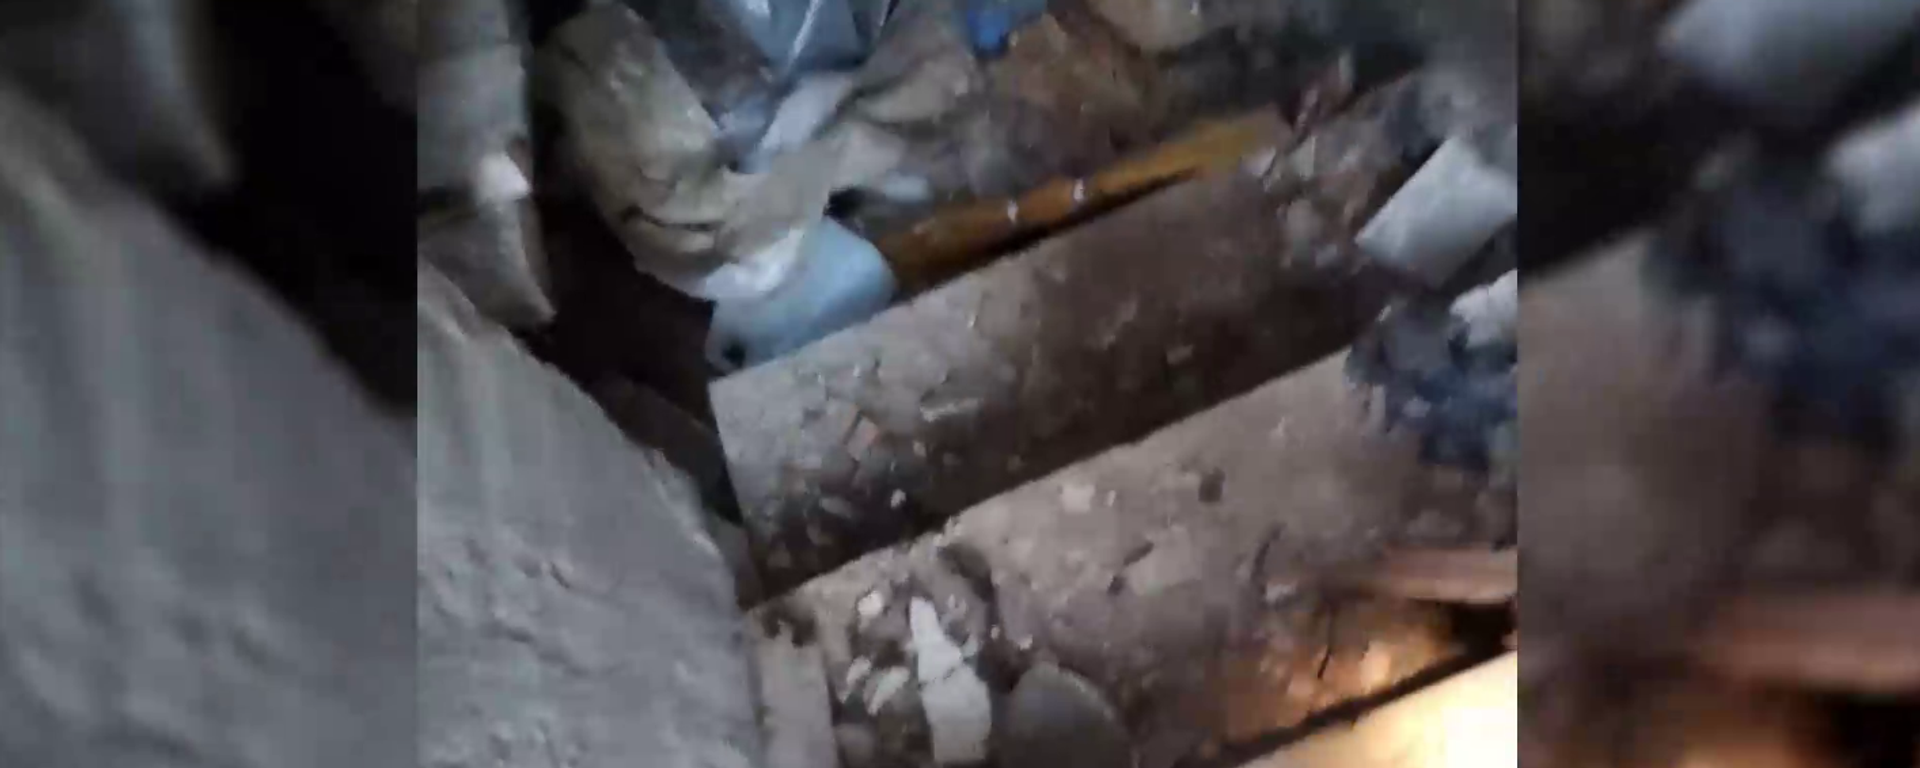 Still from grizzly video of torture chamber near Kherson, Ukraine containing body of what Russian investigators fear is a Russian servicemen tortured to death by Ukrainian troops or nationalist formations. - Sputnik International, 1920, 03.05.2022